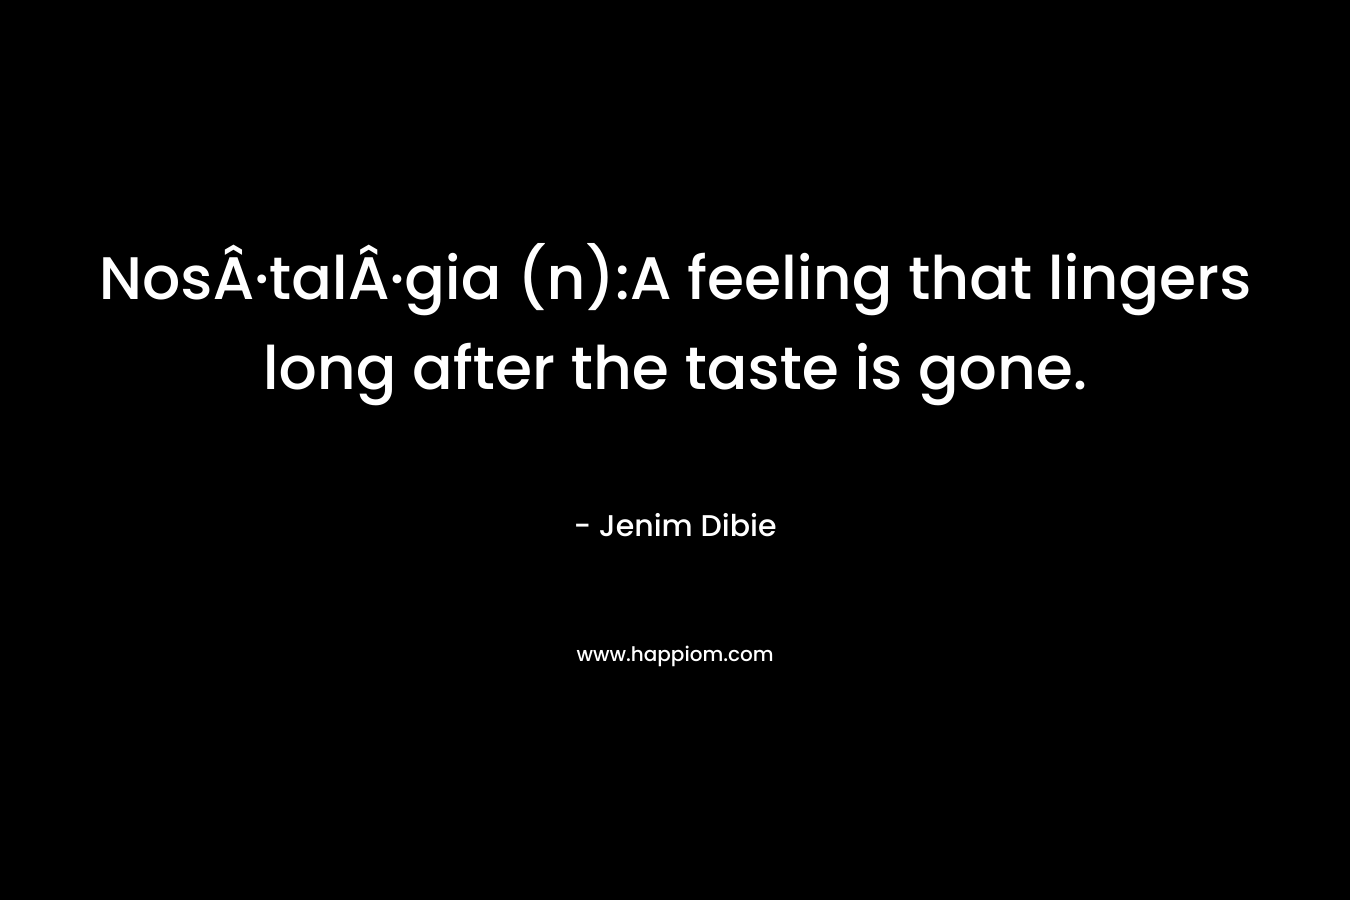 NosÂ·talÂ·gia (n):A feeling that lingers long after the taste is gone.